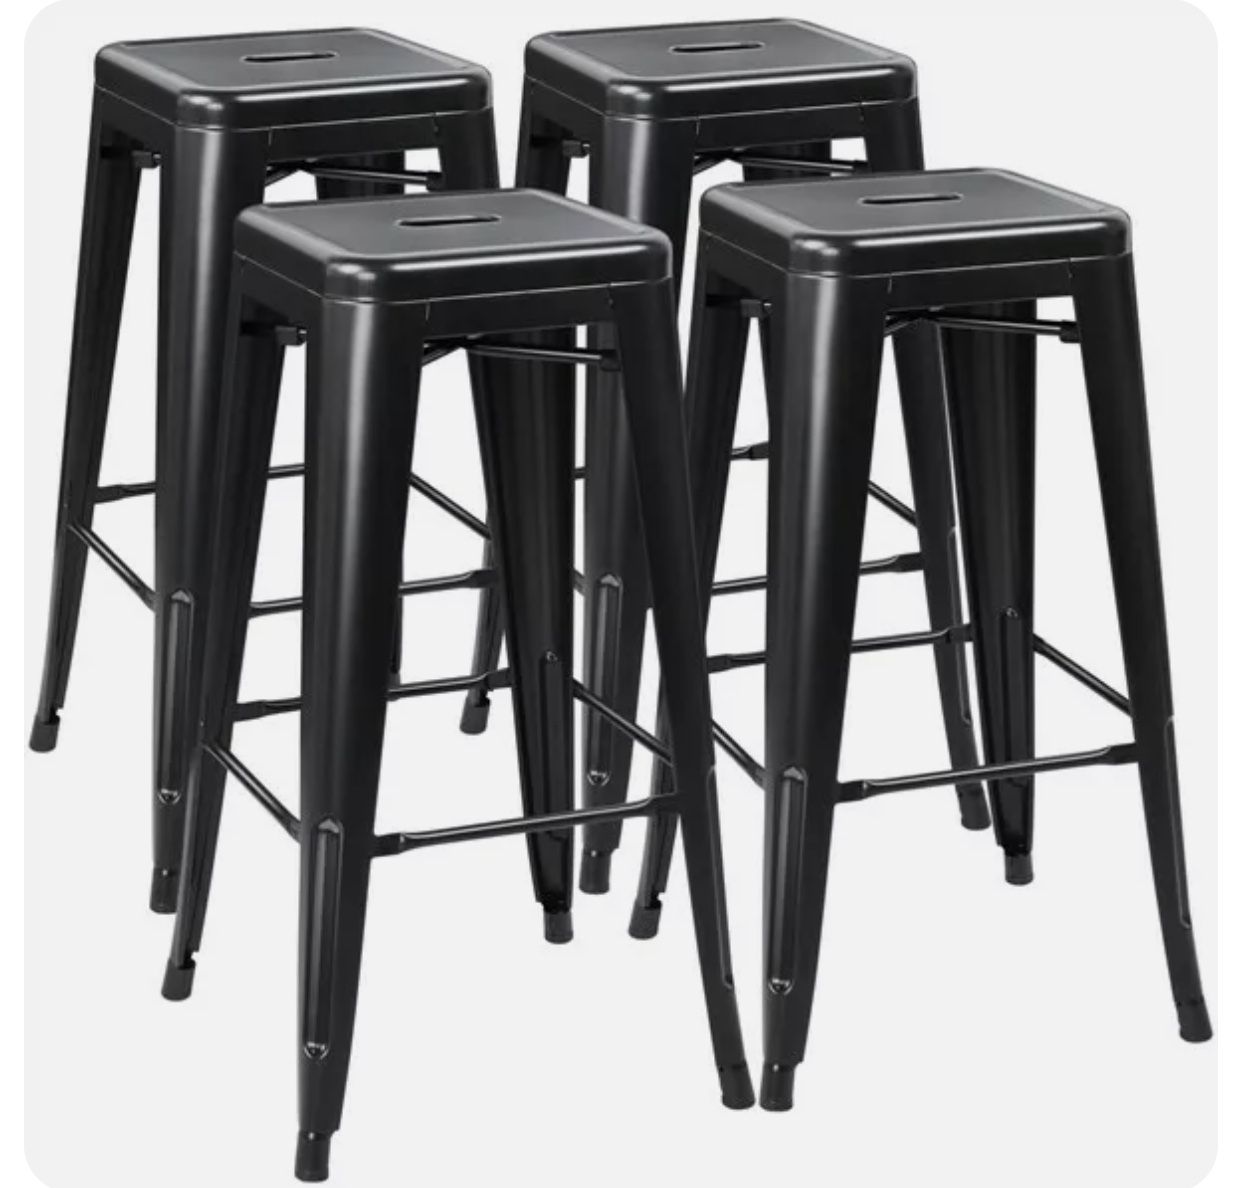 Bar Stools Set of 4 with Wooden Seat Backless Barstools Industrial Counter Height Bar Stools Stackable for Kitchen (26 inch, Matte Black )